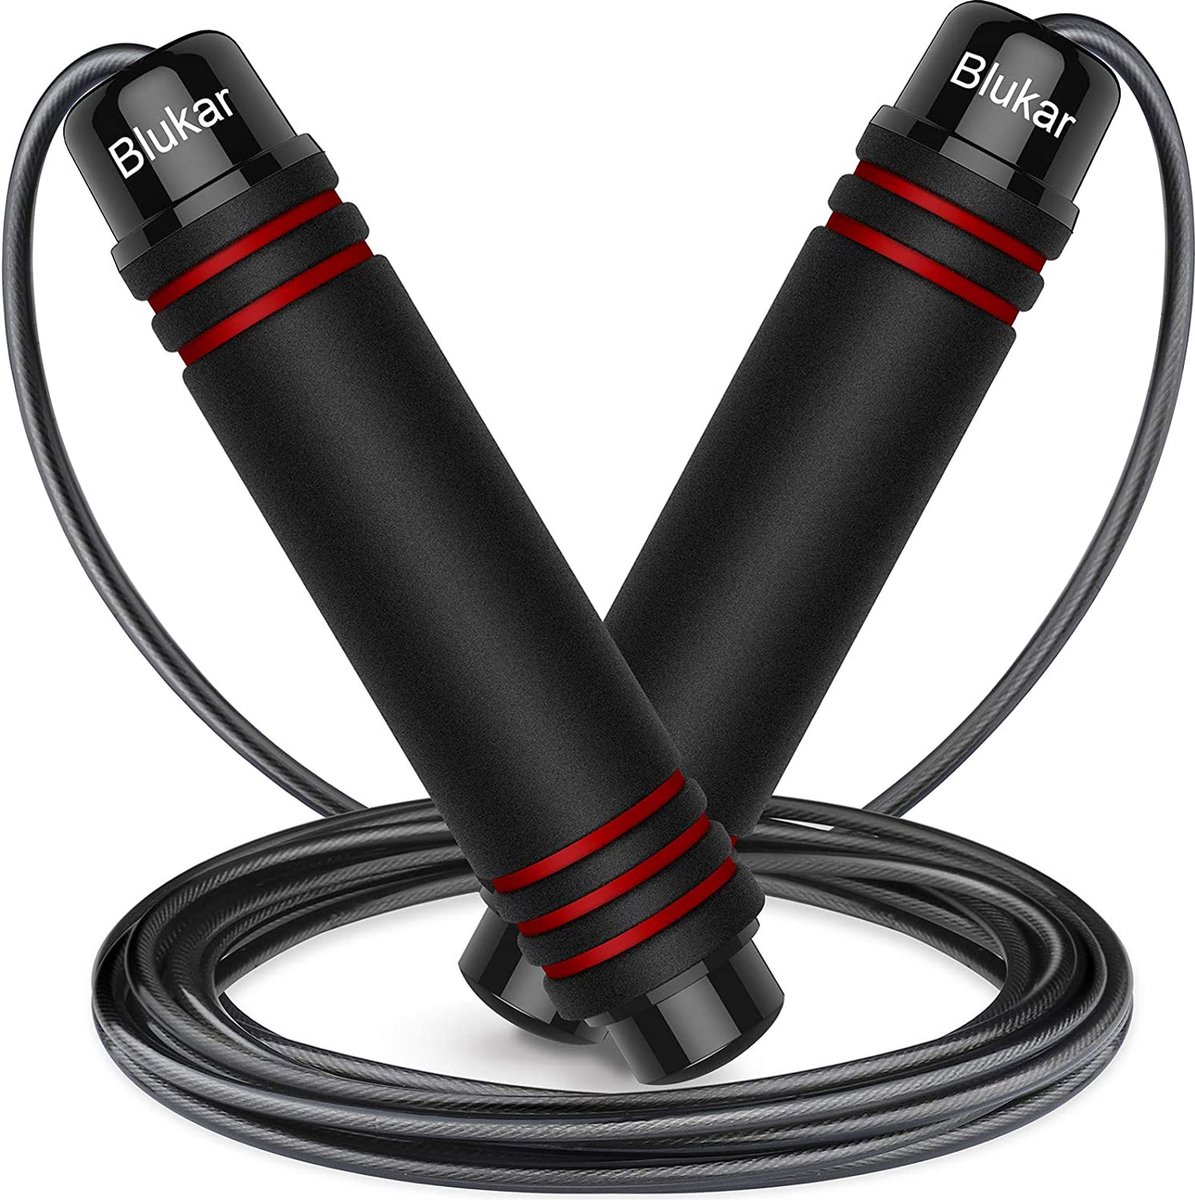 Blukar Skipping Rope with Skin-Friendly Foam Handles, Speed Rope, Adjustable Length, Non-Slip and Ideal for Fitness and Endurance Training, Suitable for Children and Adults